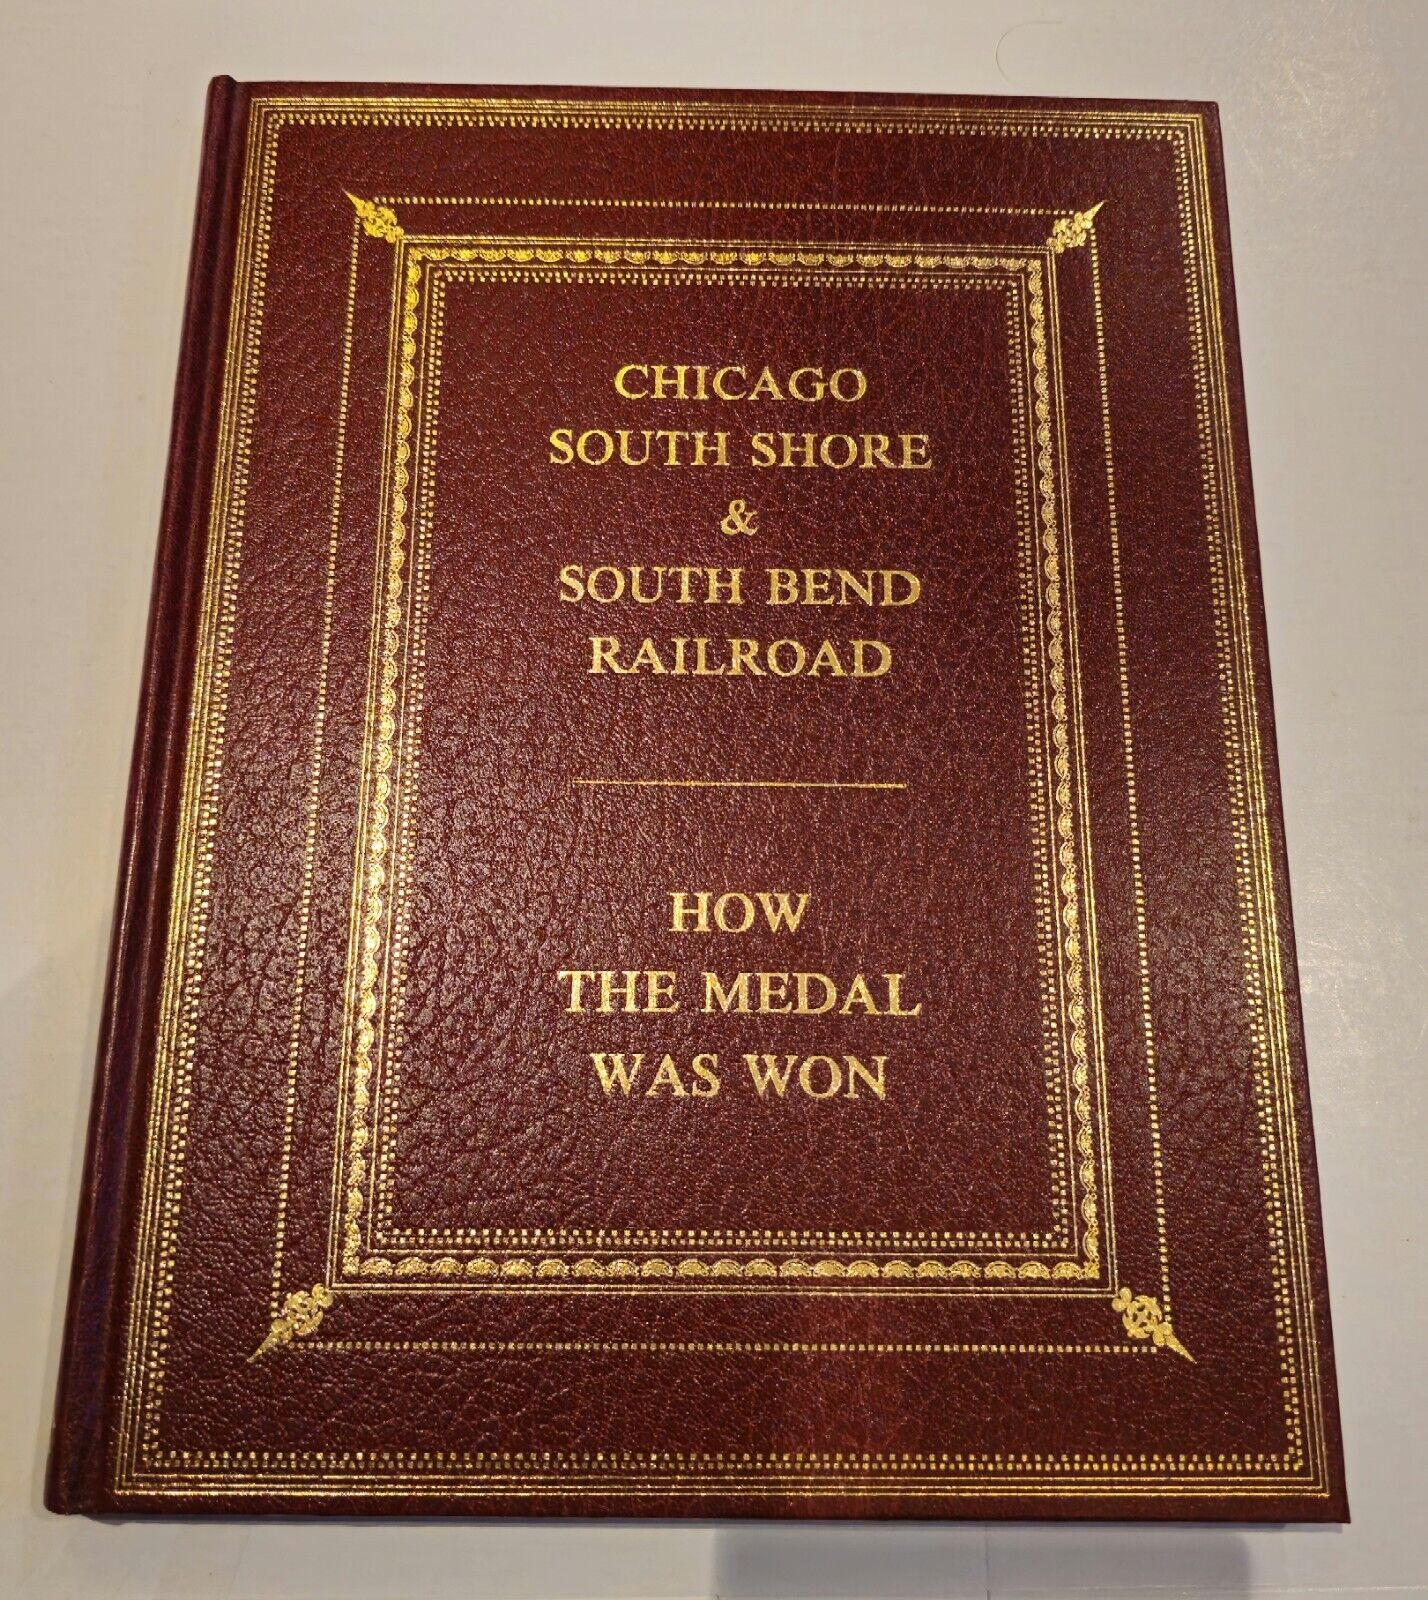 Chicago South Shore & South Bend Railroad how the Medal was Won